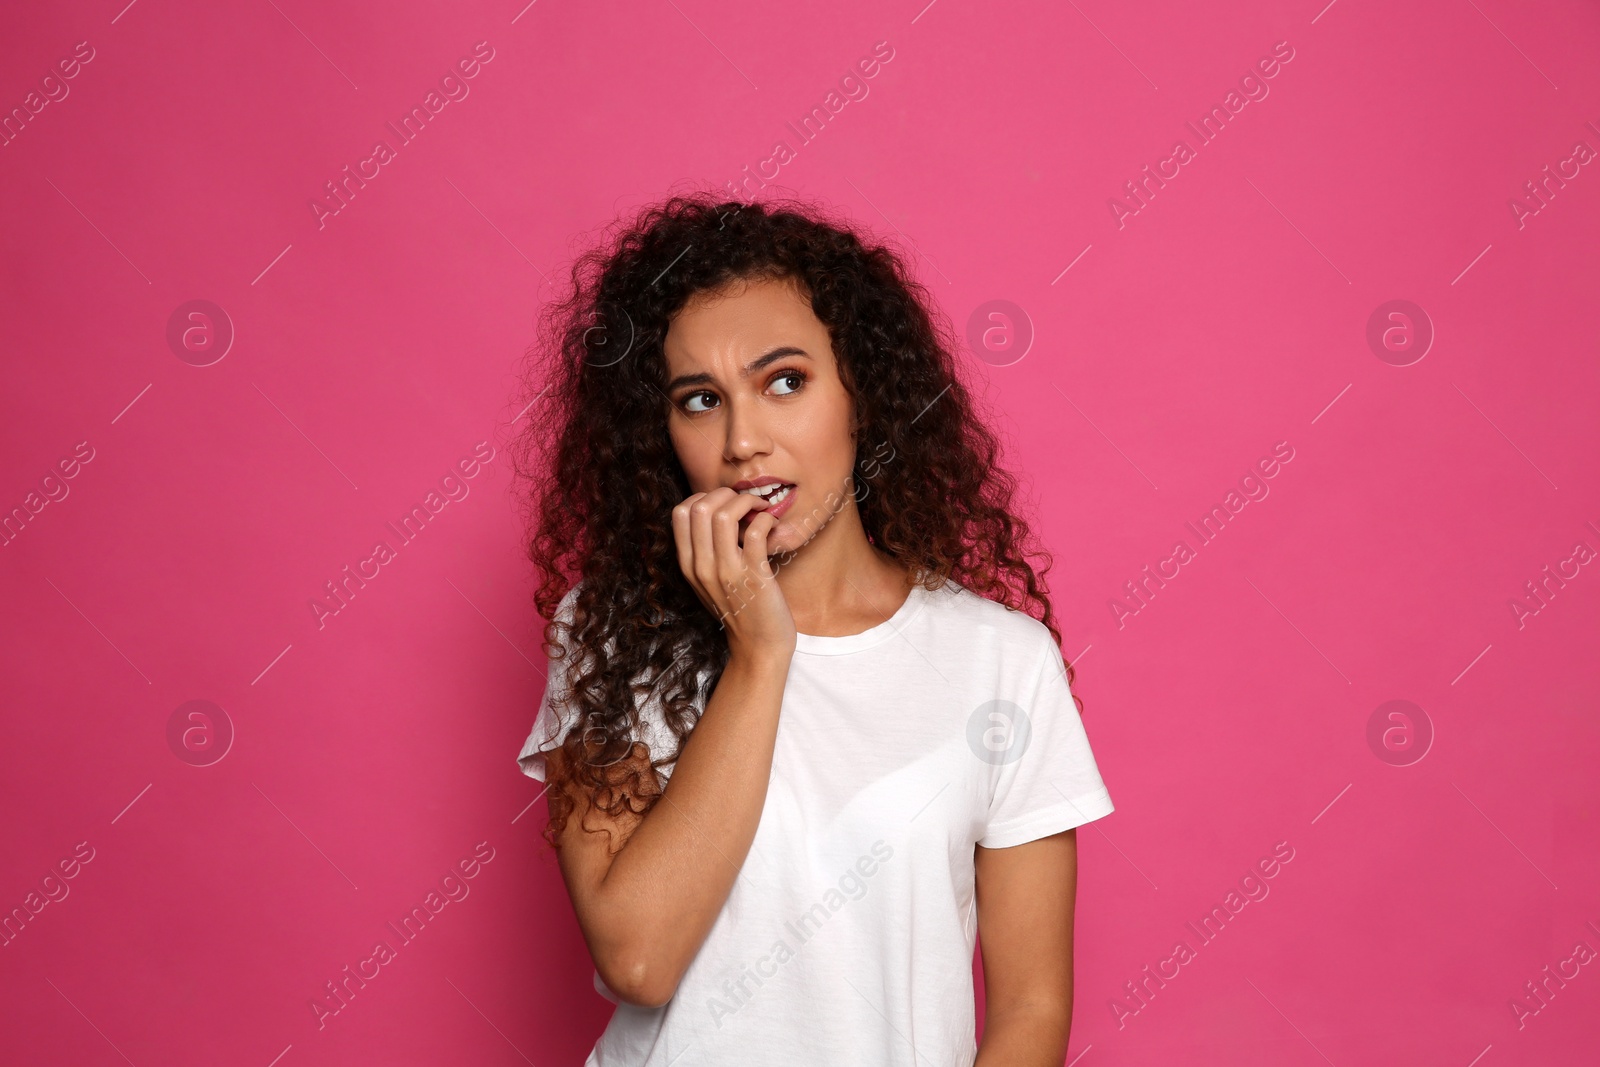 Photo of African-American woman biting her nails on pink background